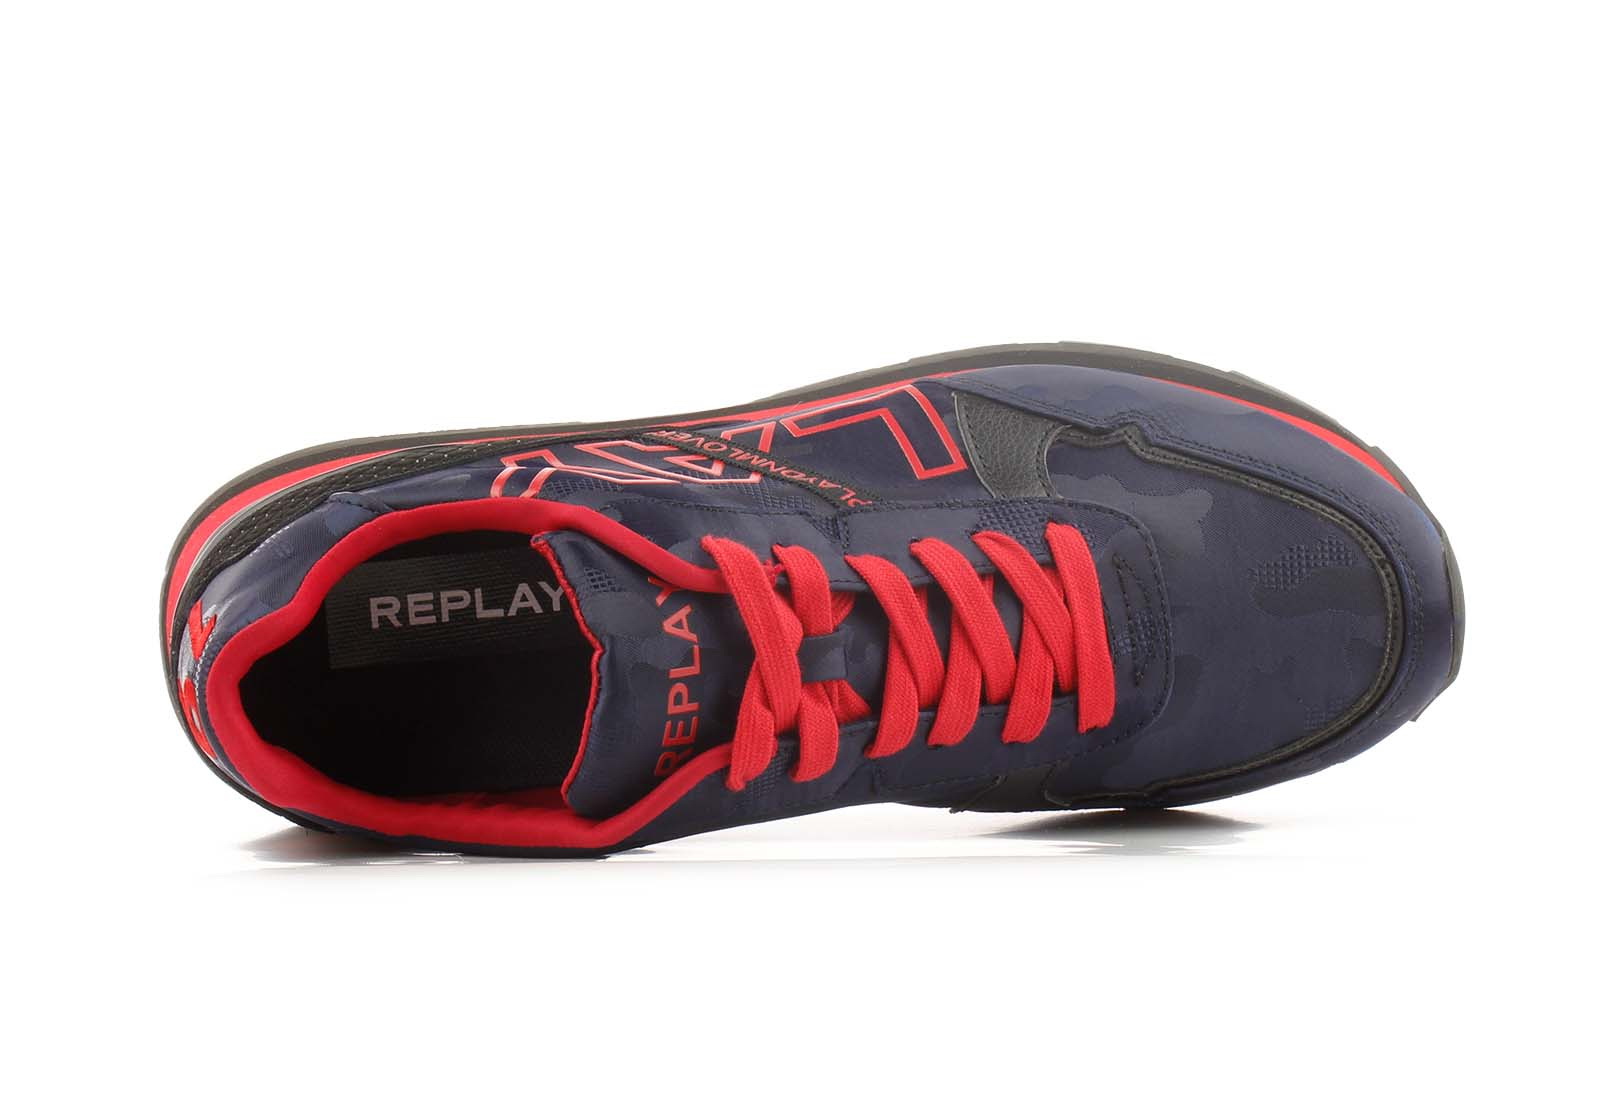 Replay Sneakers - Rs680040t-562 - RS680040T-562 - Online shop for sneakers,  shoes and boots